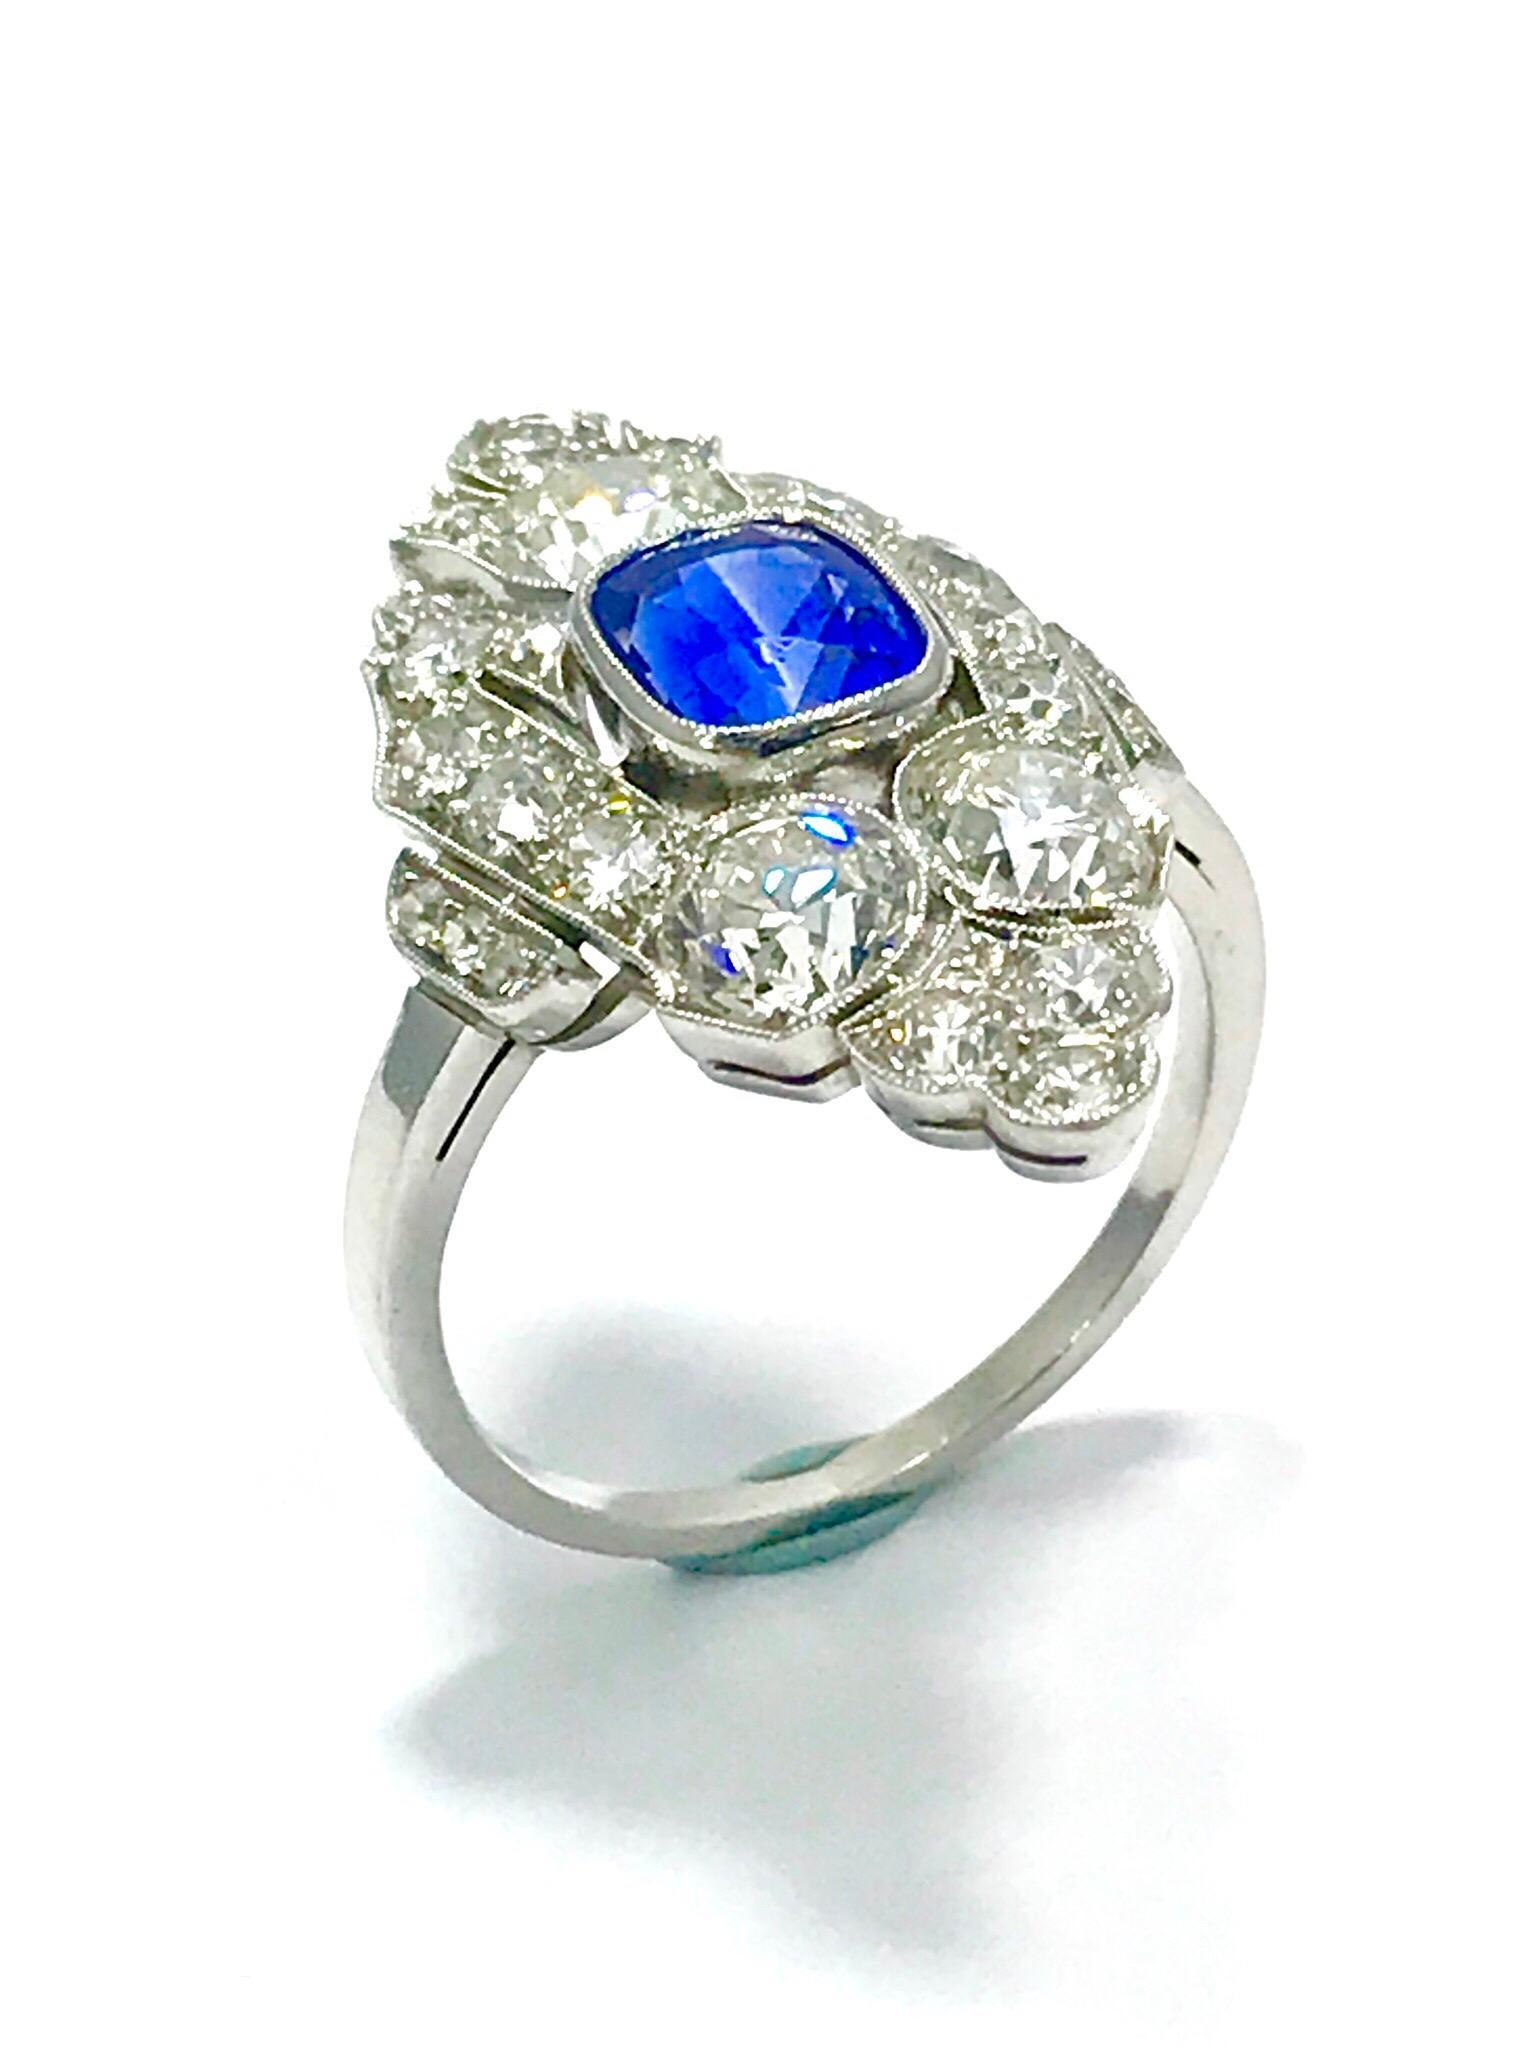 This is a stunning Art Deco Style natural no heat Sapphire and Diamond platinum ring.  The sapphire is cushion in shape, and bezel set with a milgrain edge.  It measures 6.90 x 5.80 x 4.90 millimeters, and weighs approximately 1.72 carats.  The